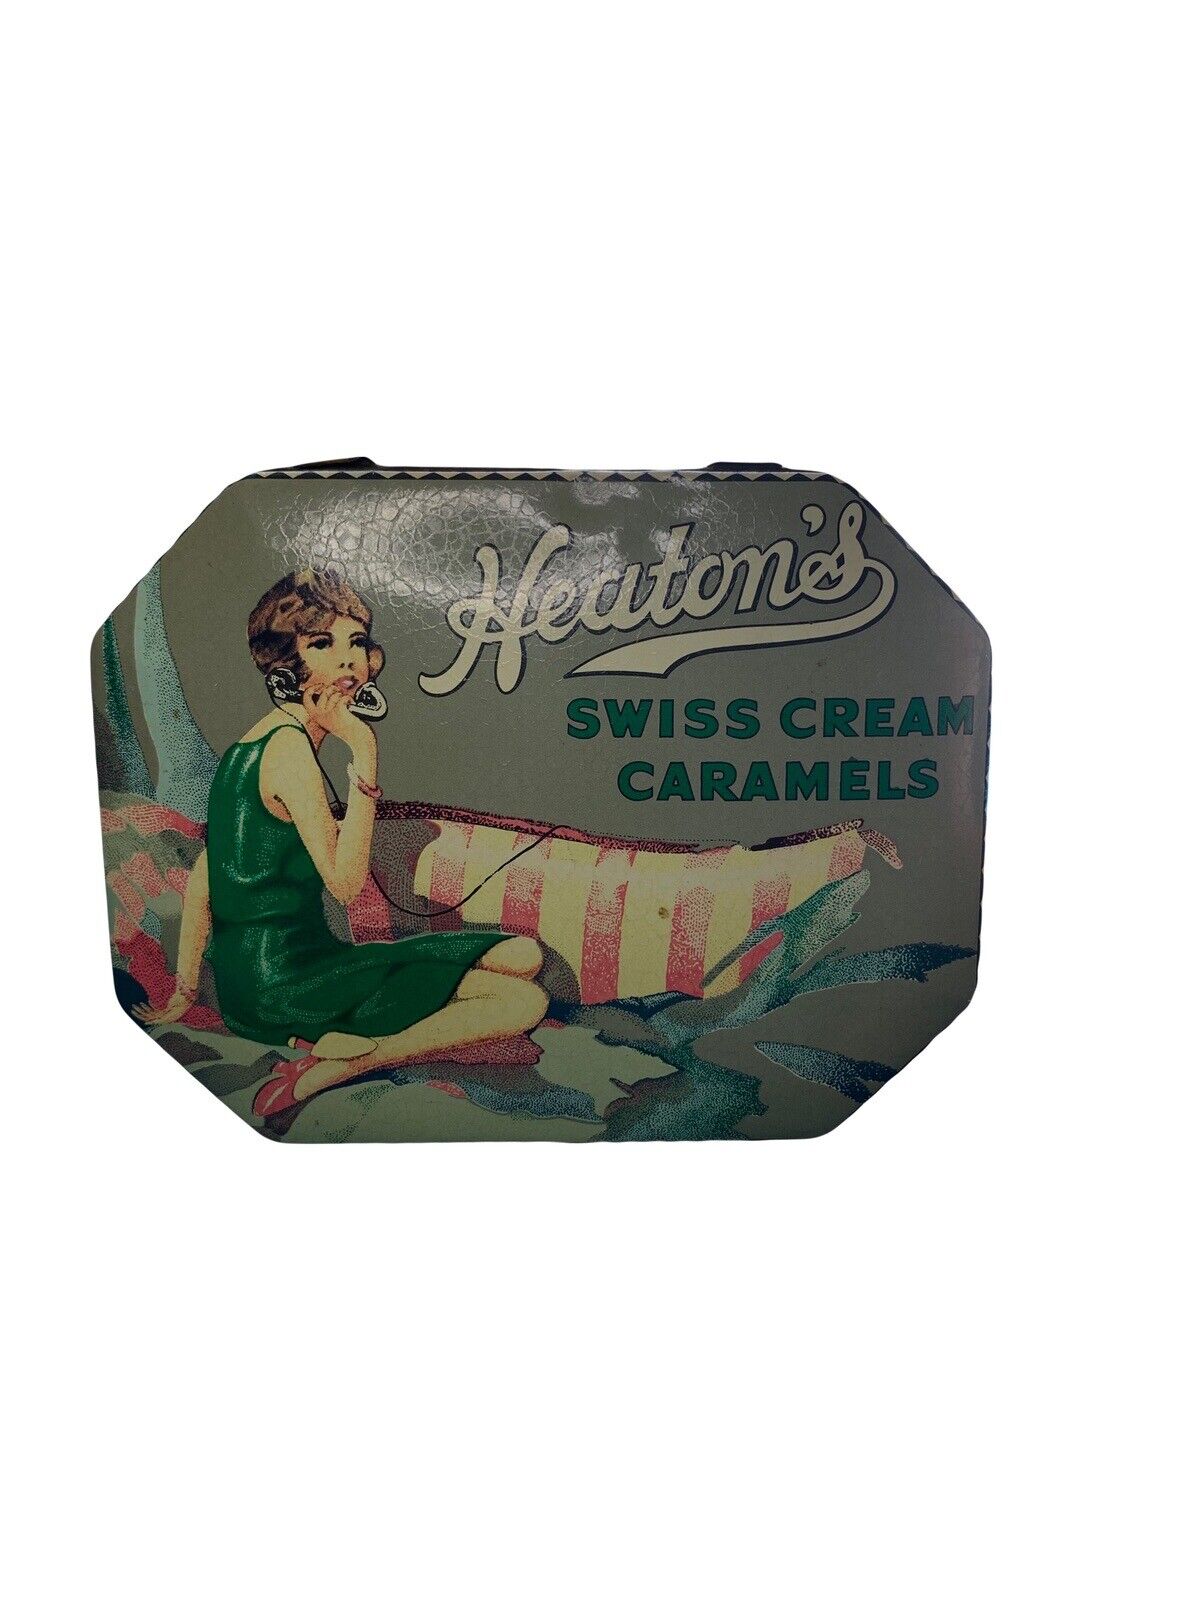 Vintage Heaton\'s Swiss Cream Caramels Tin Flapper Girl Made In England